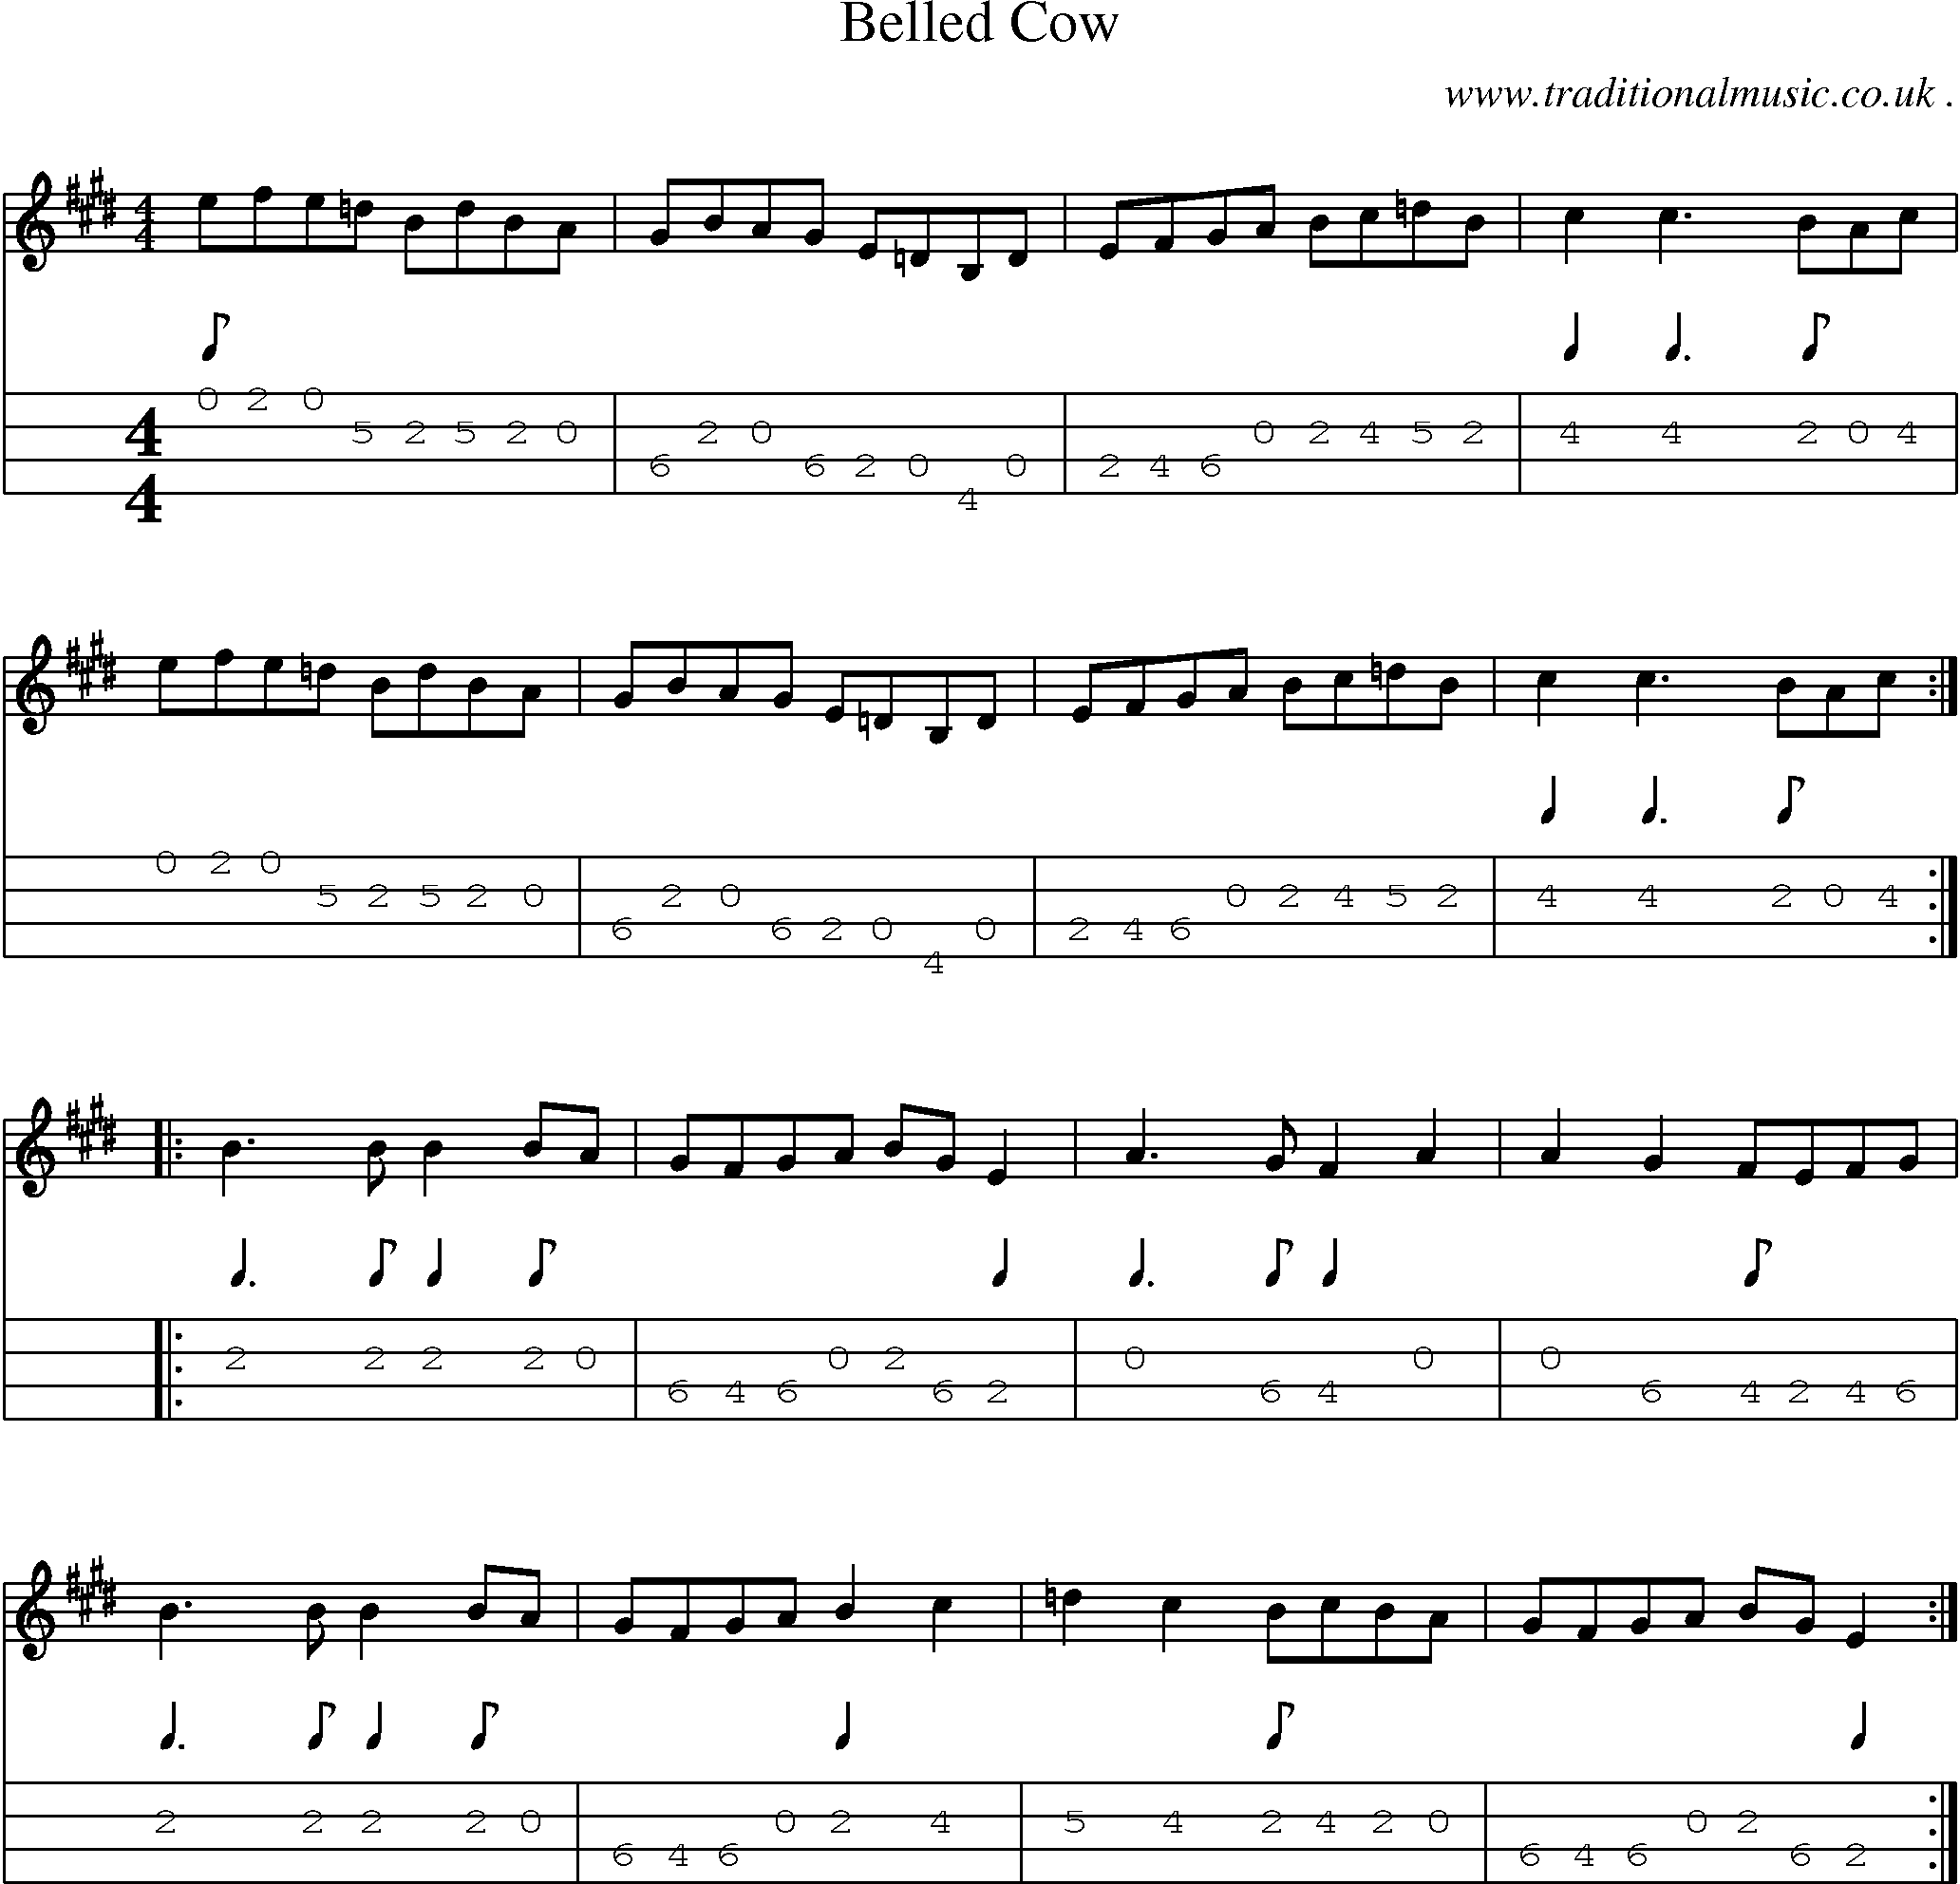 Music Score and Mandolin Tabs for Belled Cow